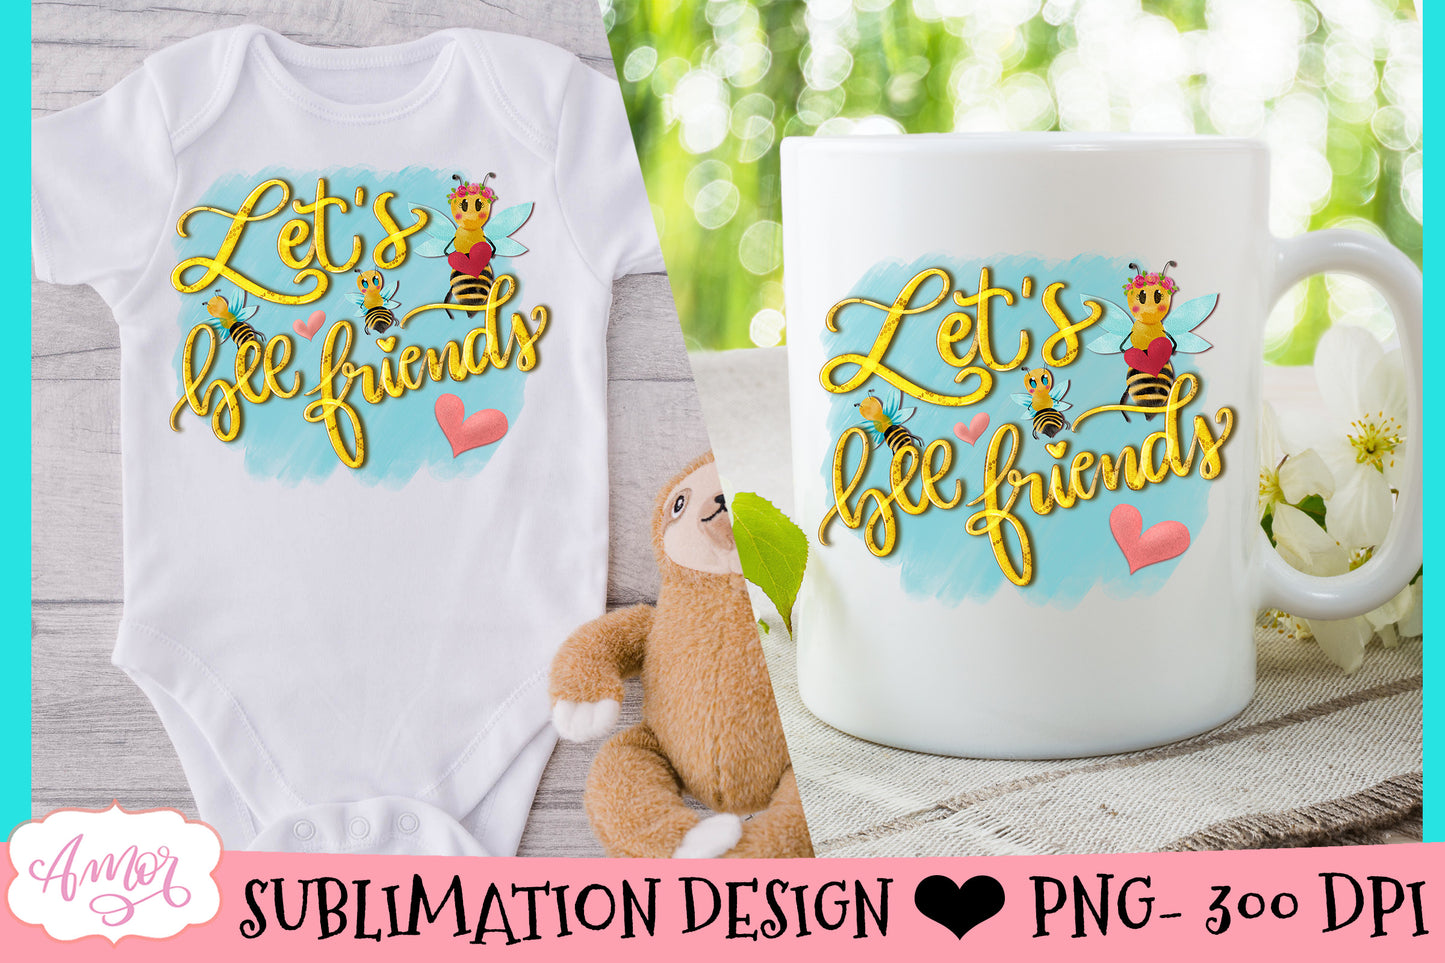 Let's bee friends cute sublimation design for T-shirts